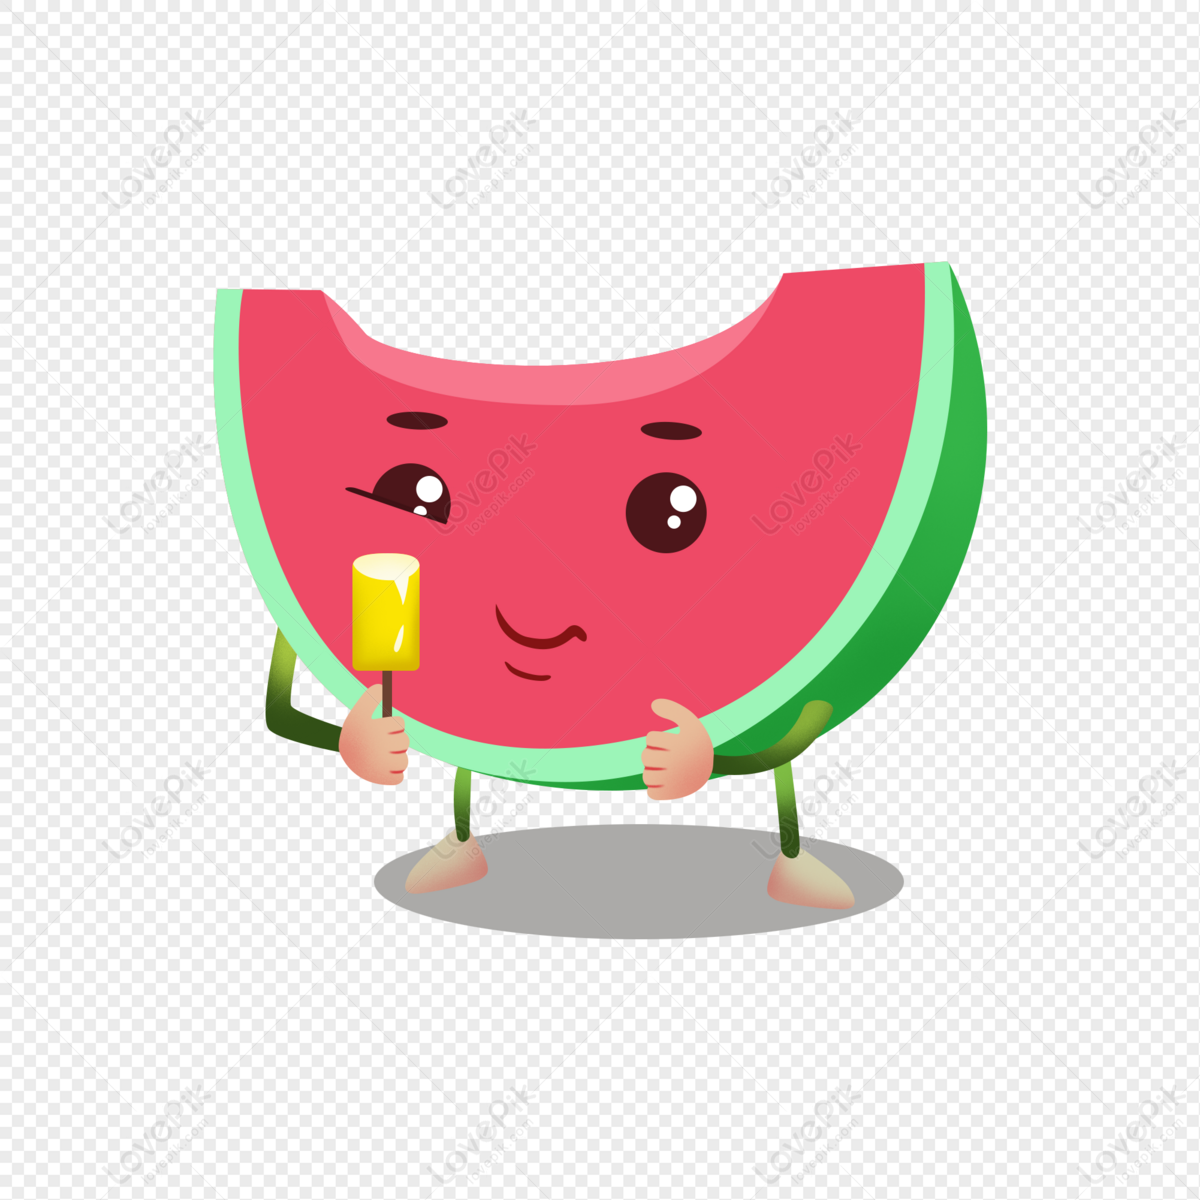 Cartoon Watermelon Images, HD Pictures For Free Vectors Download -  